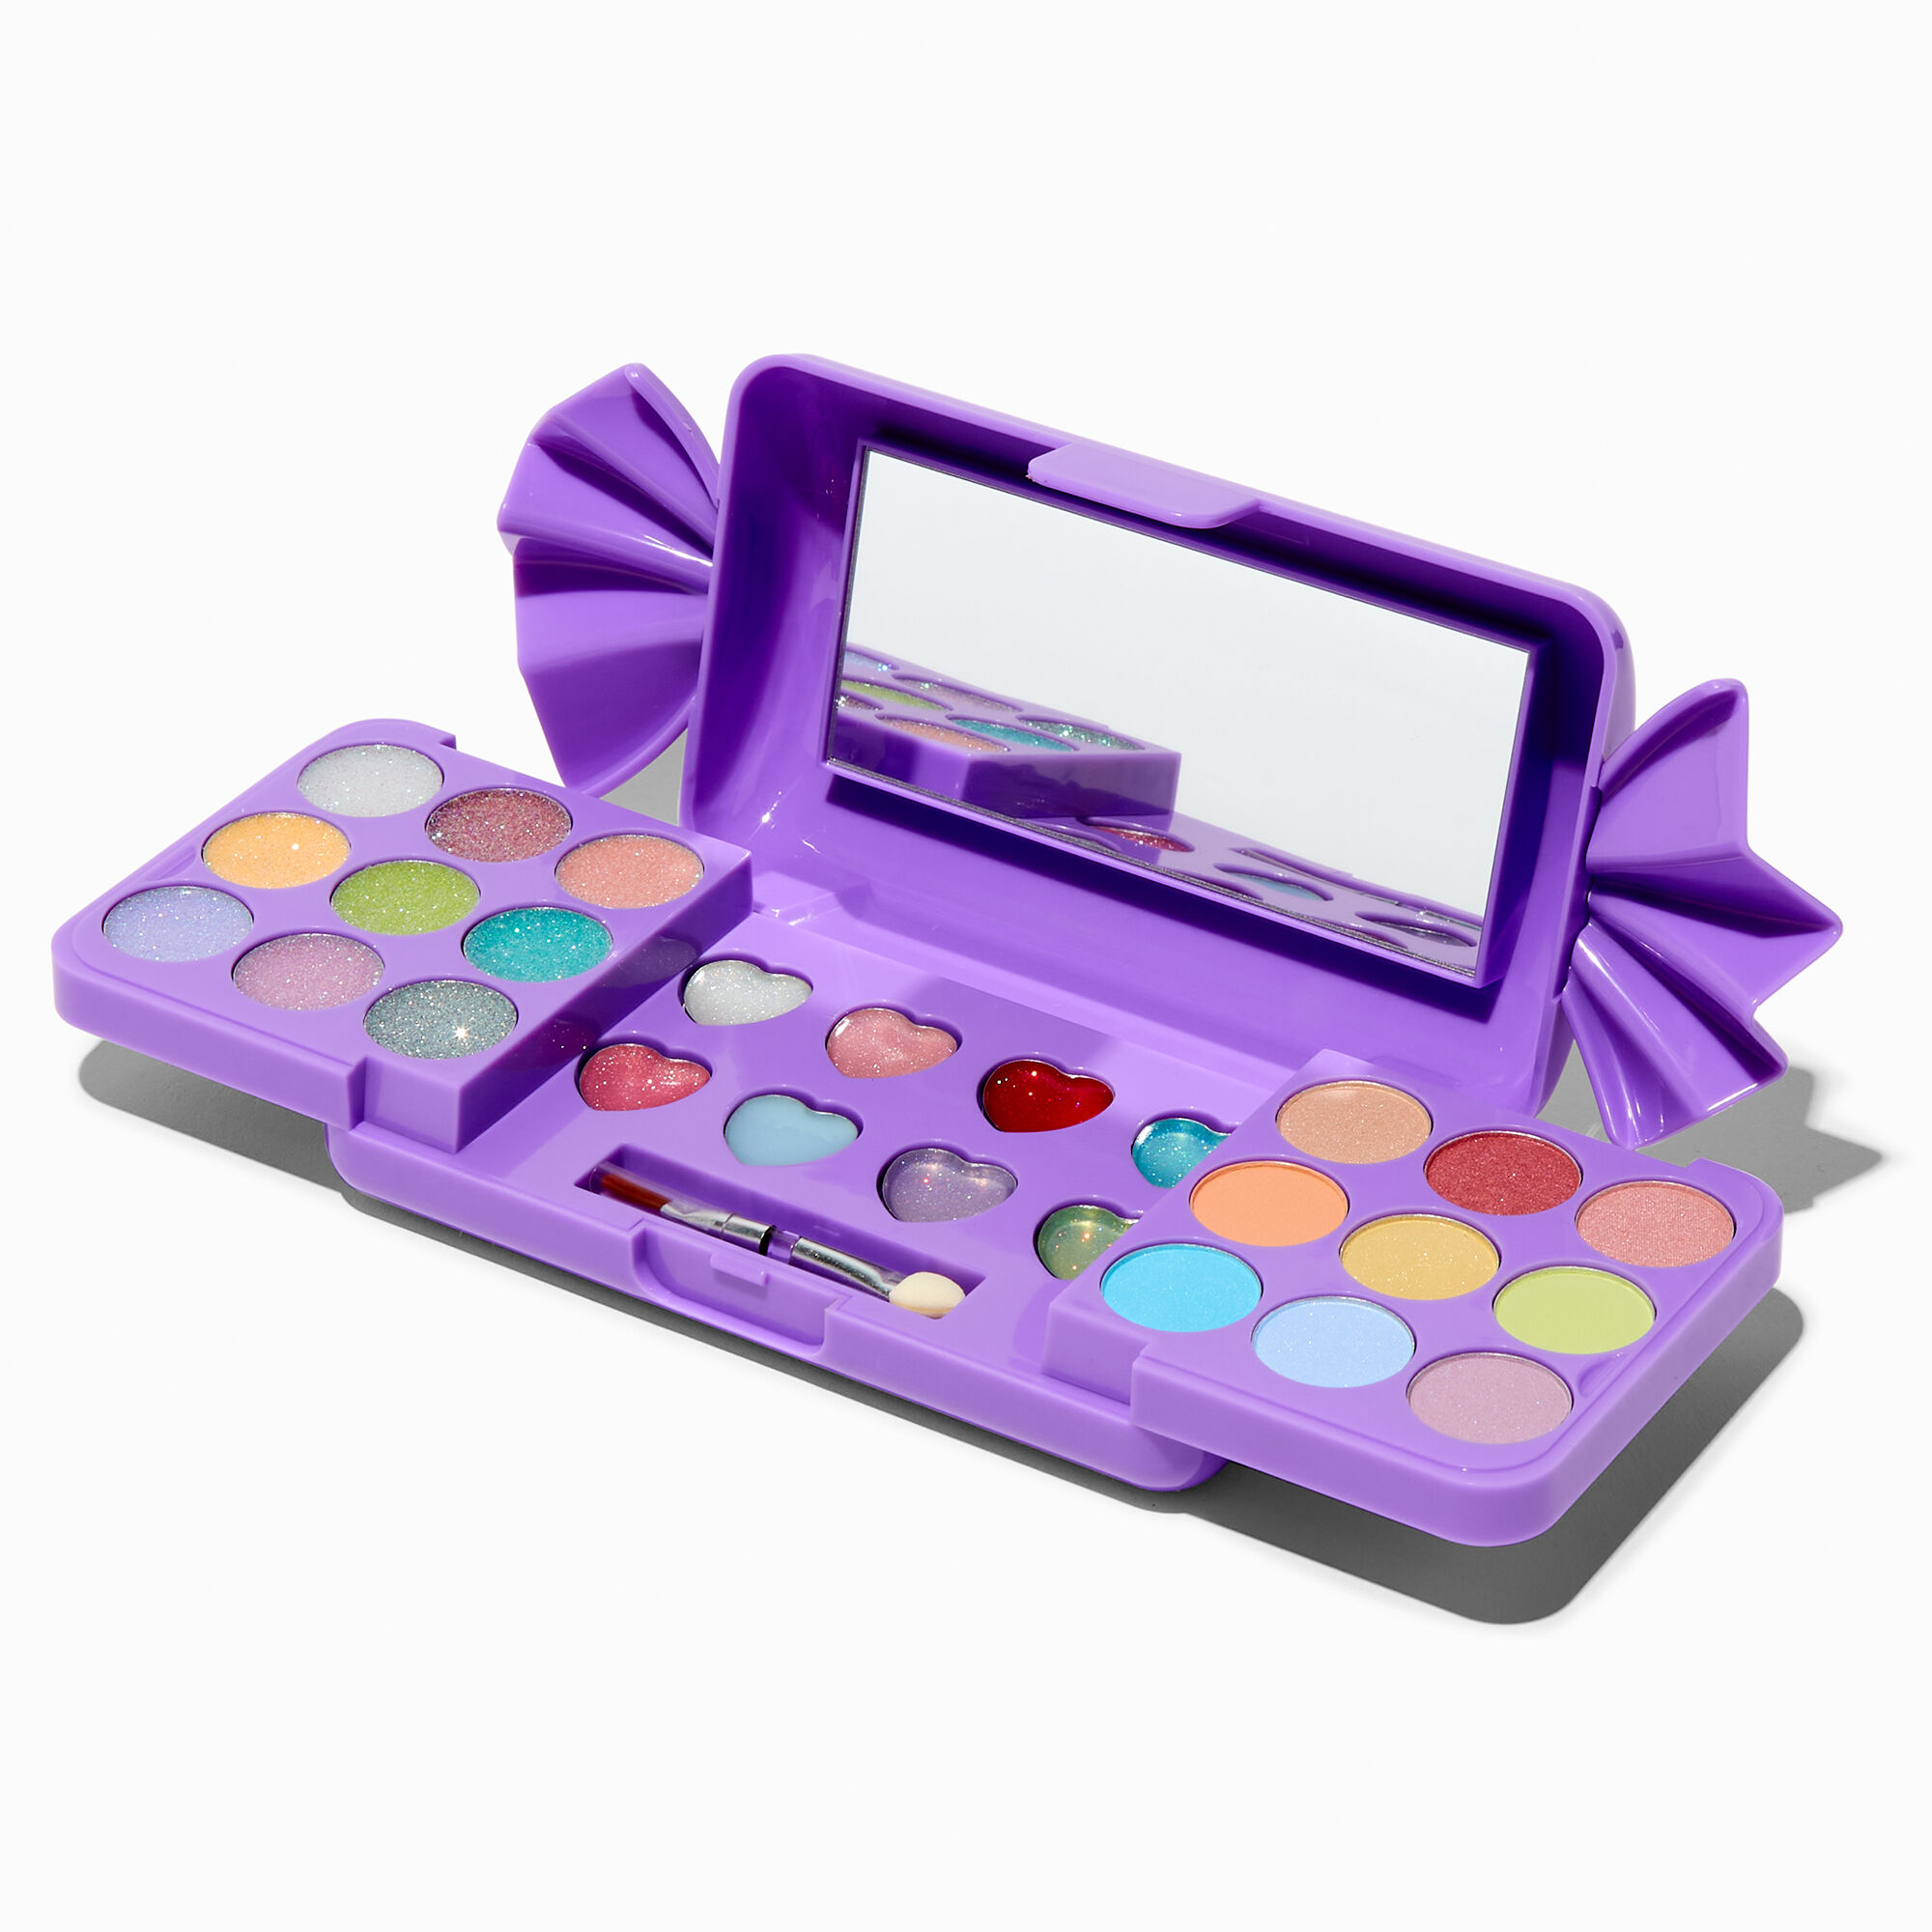 View Claires Puffy Candy Bling Makeup Palette information